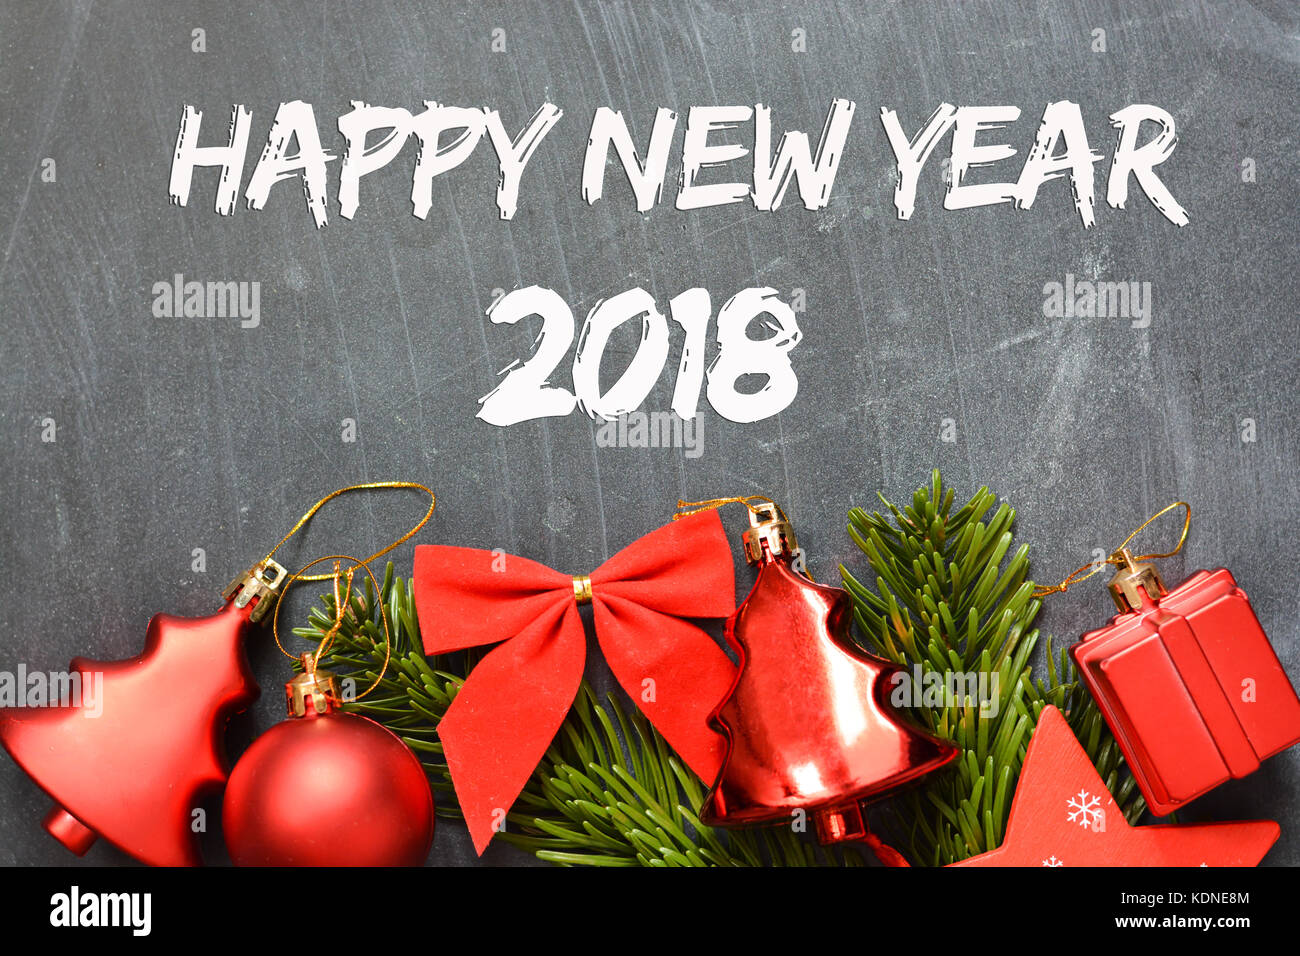 Happy new year 2018 on blackboard with Christmas decoration Stock Photo